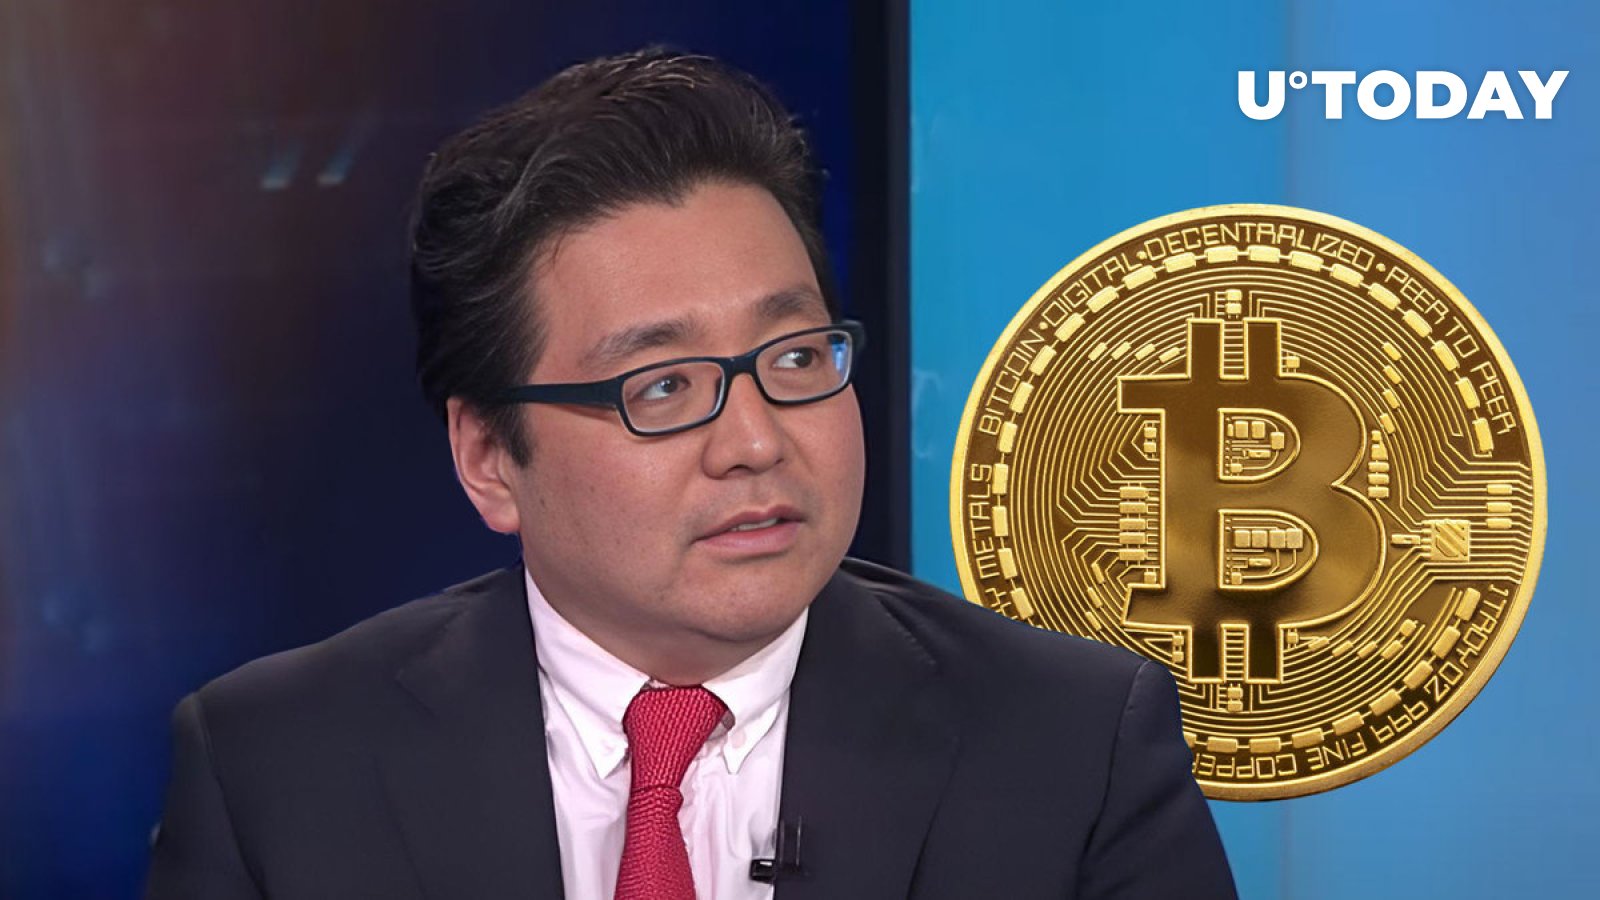 Fundstrat's Tom Lee Defends His $150K Bitcoin Price Target, Citing Bitcoin Halving Tailwinds and ETF Inflows